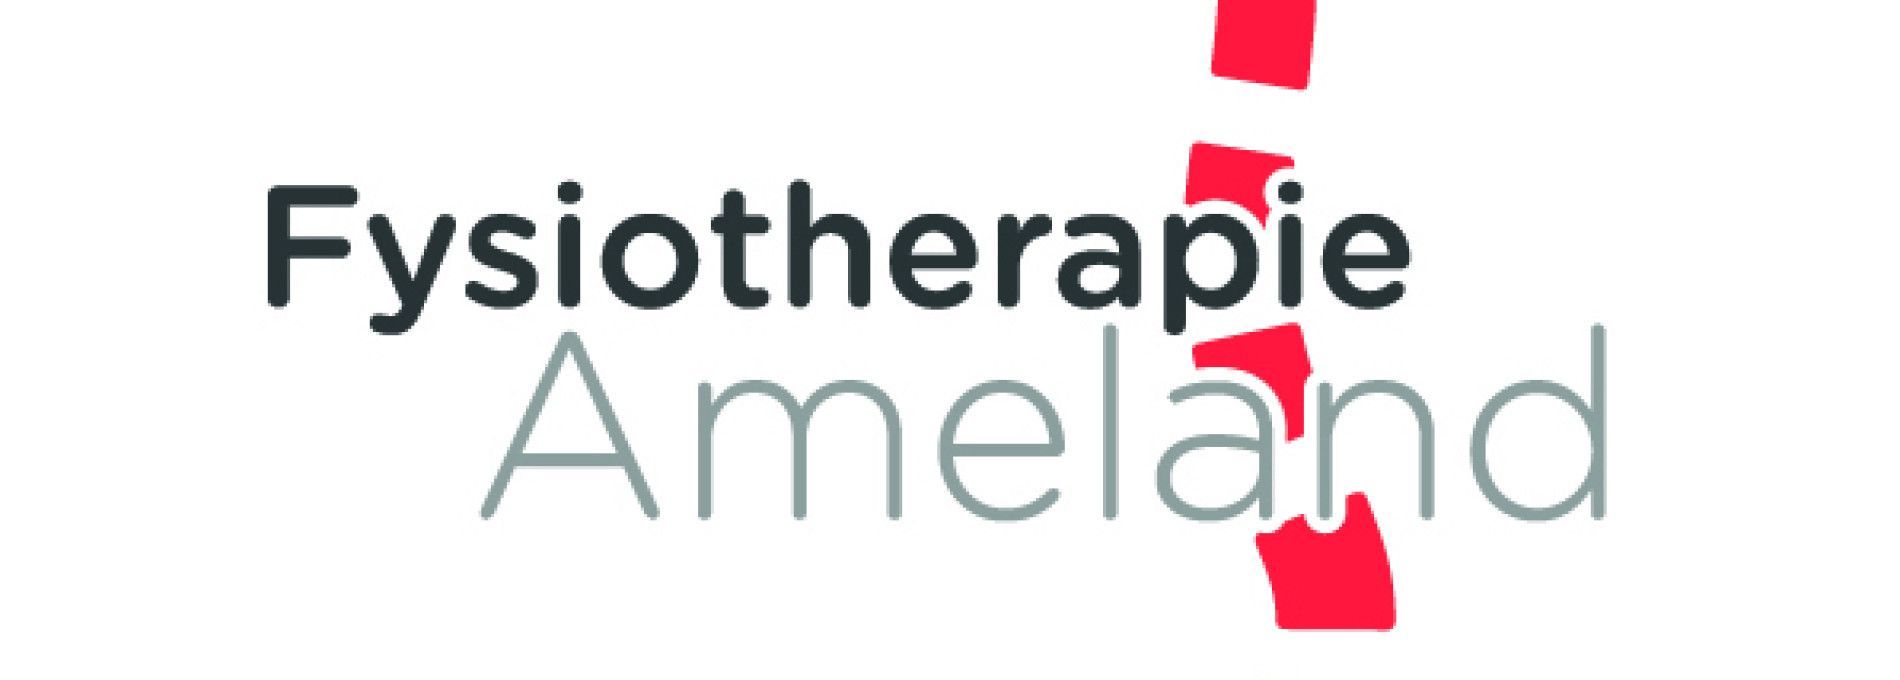 Physiotherapy Ameland - Tourist Information 